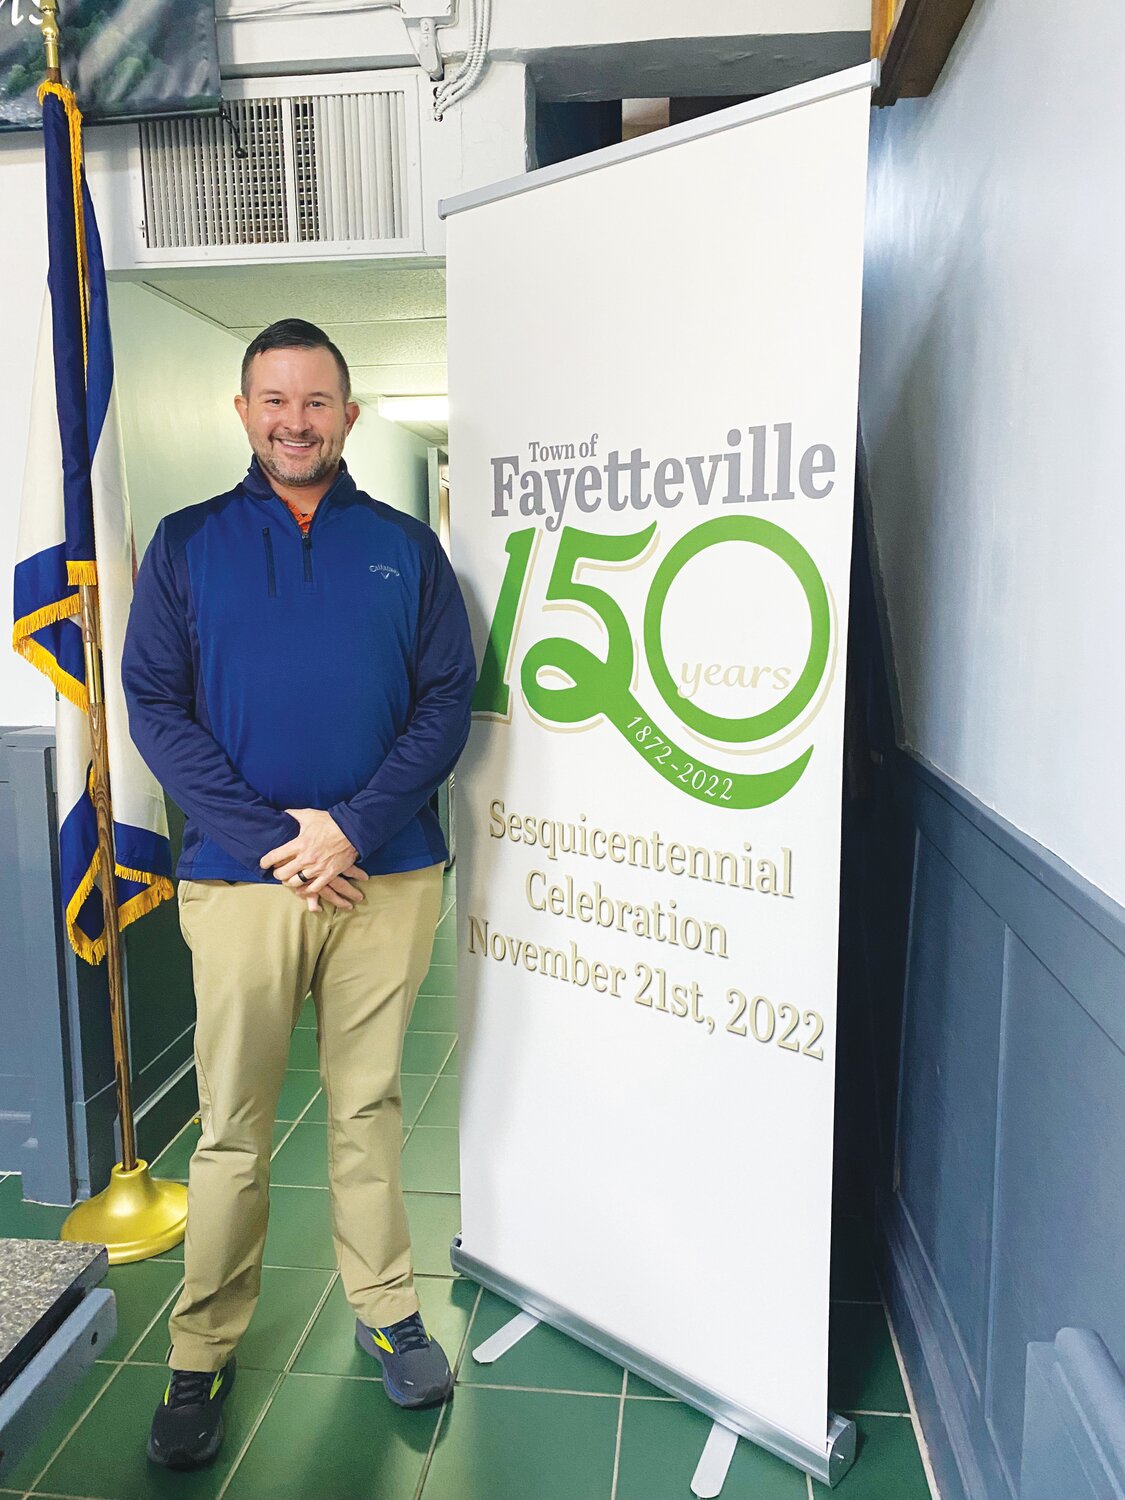 Fayetteville Town Manager Matt Diederich said investors are developing apartments and hotels in the area in response to the town’s growth.